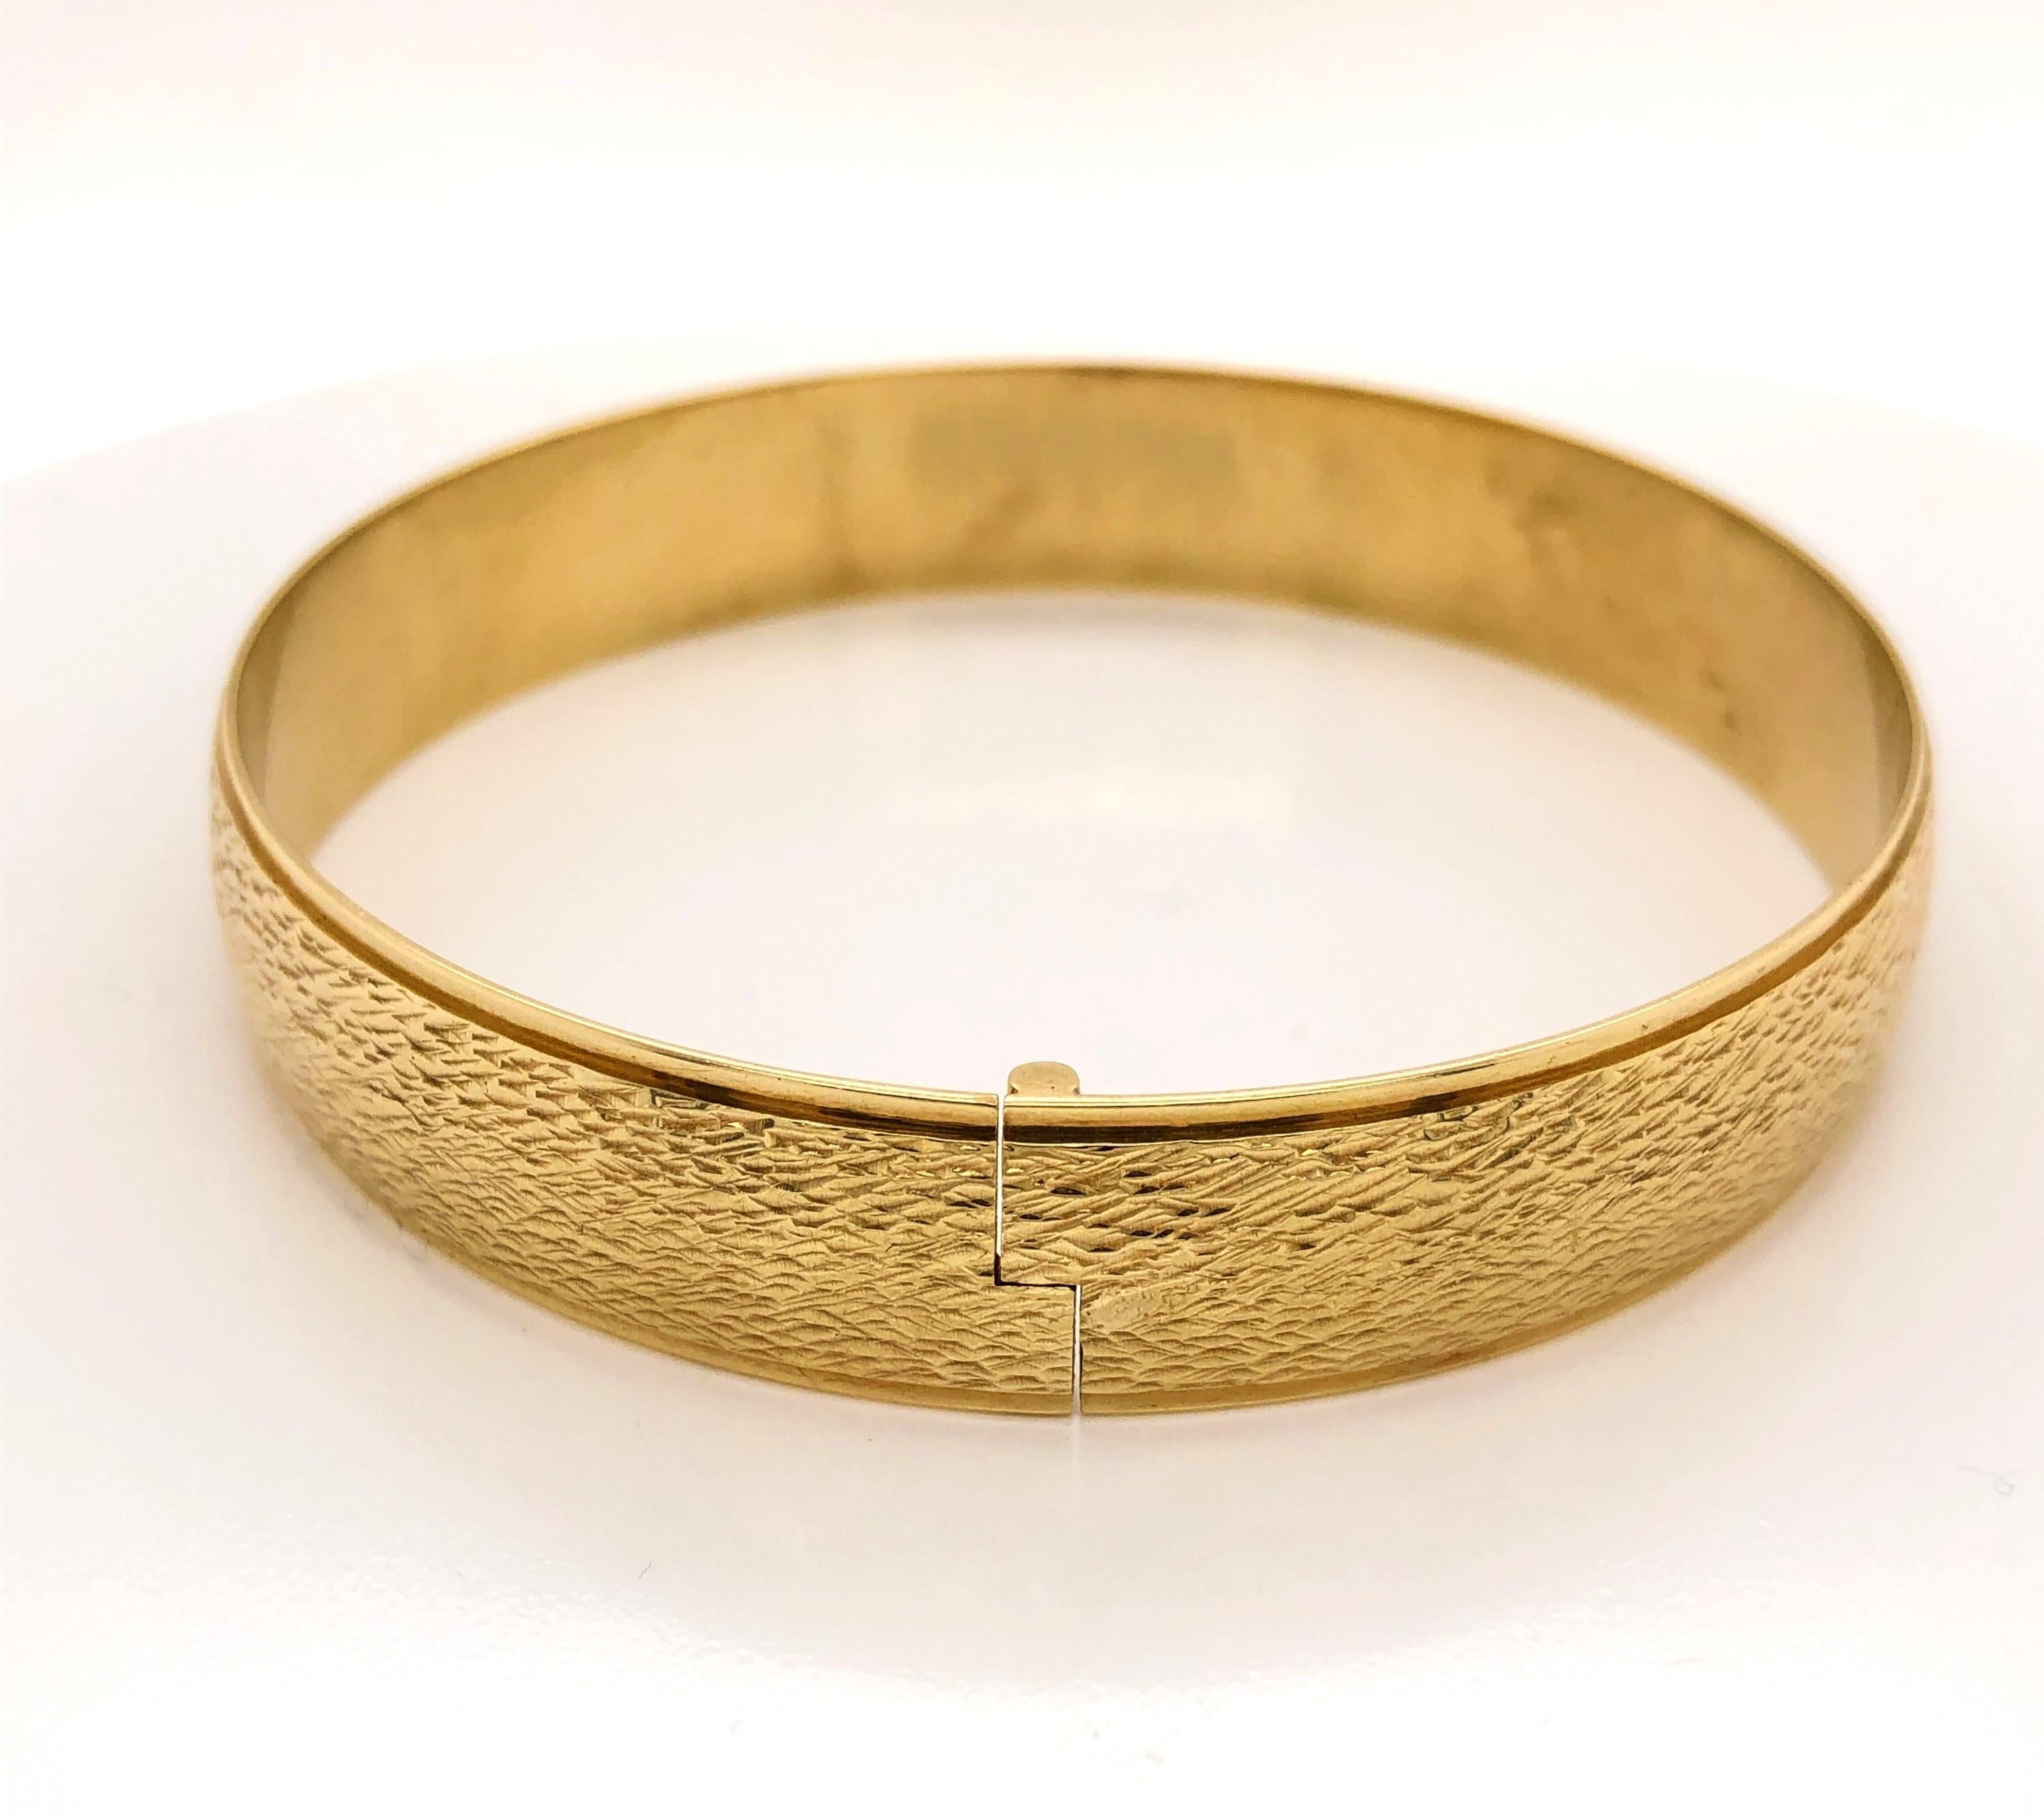 In bright fourteen carat 14K yellow gold, this sleek bangle bracelet displays contemporary styling with its textured finish complemented by a recessed polished edge detail. Quality made with a 
no-show mystery hinge for ease of wear. The bracelet